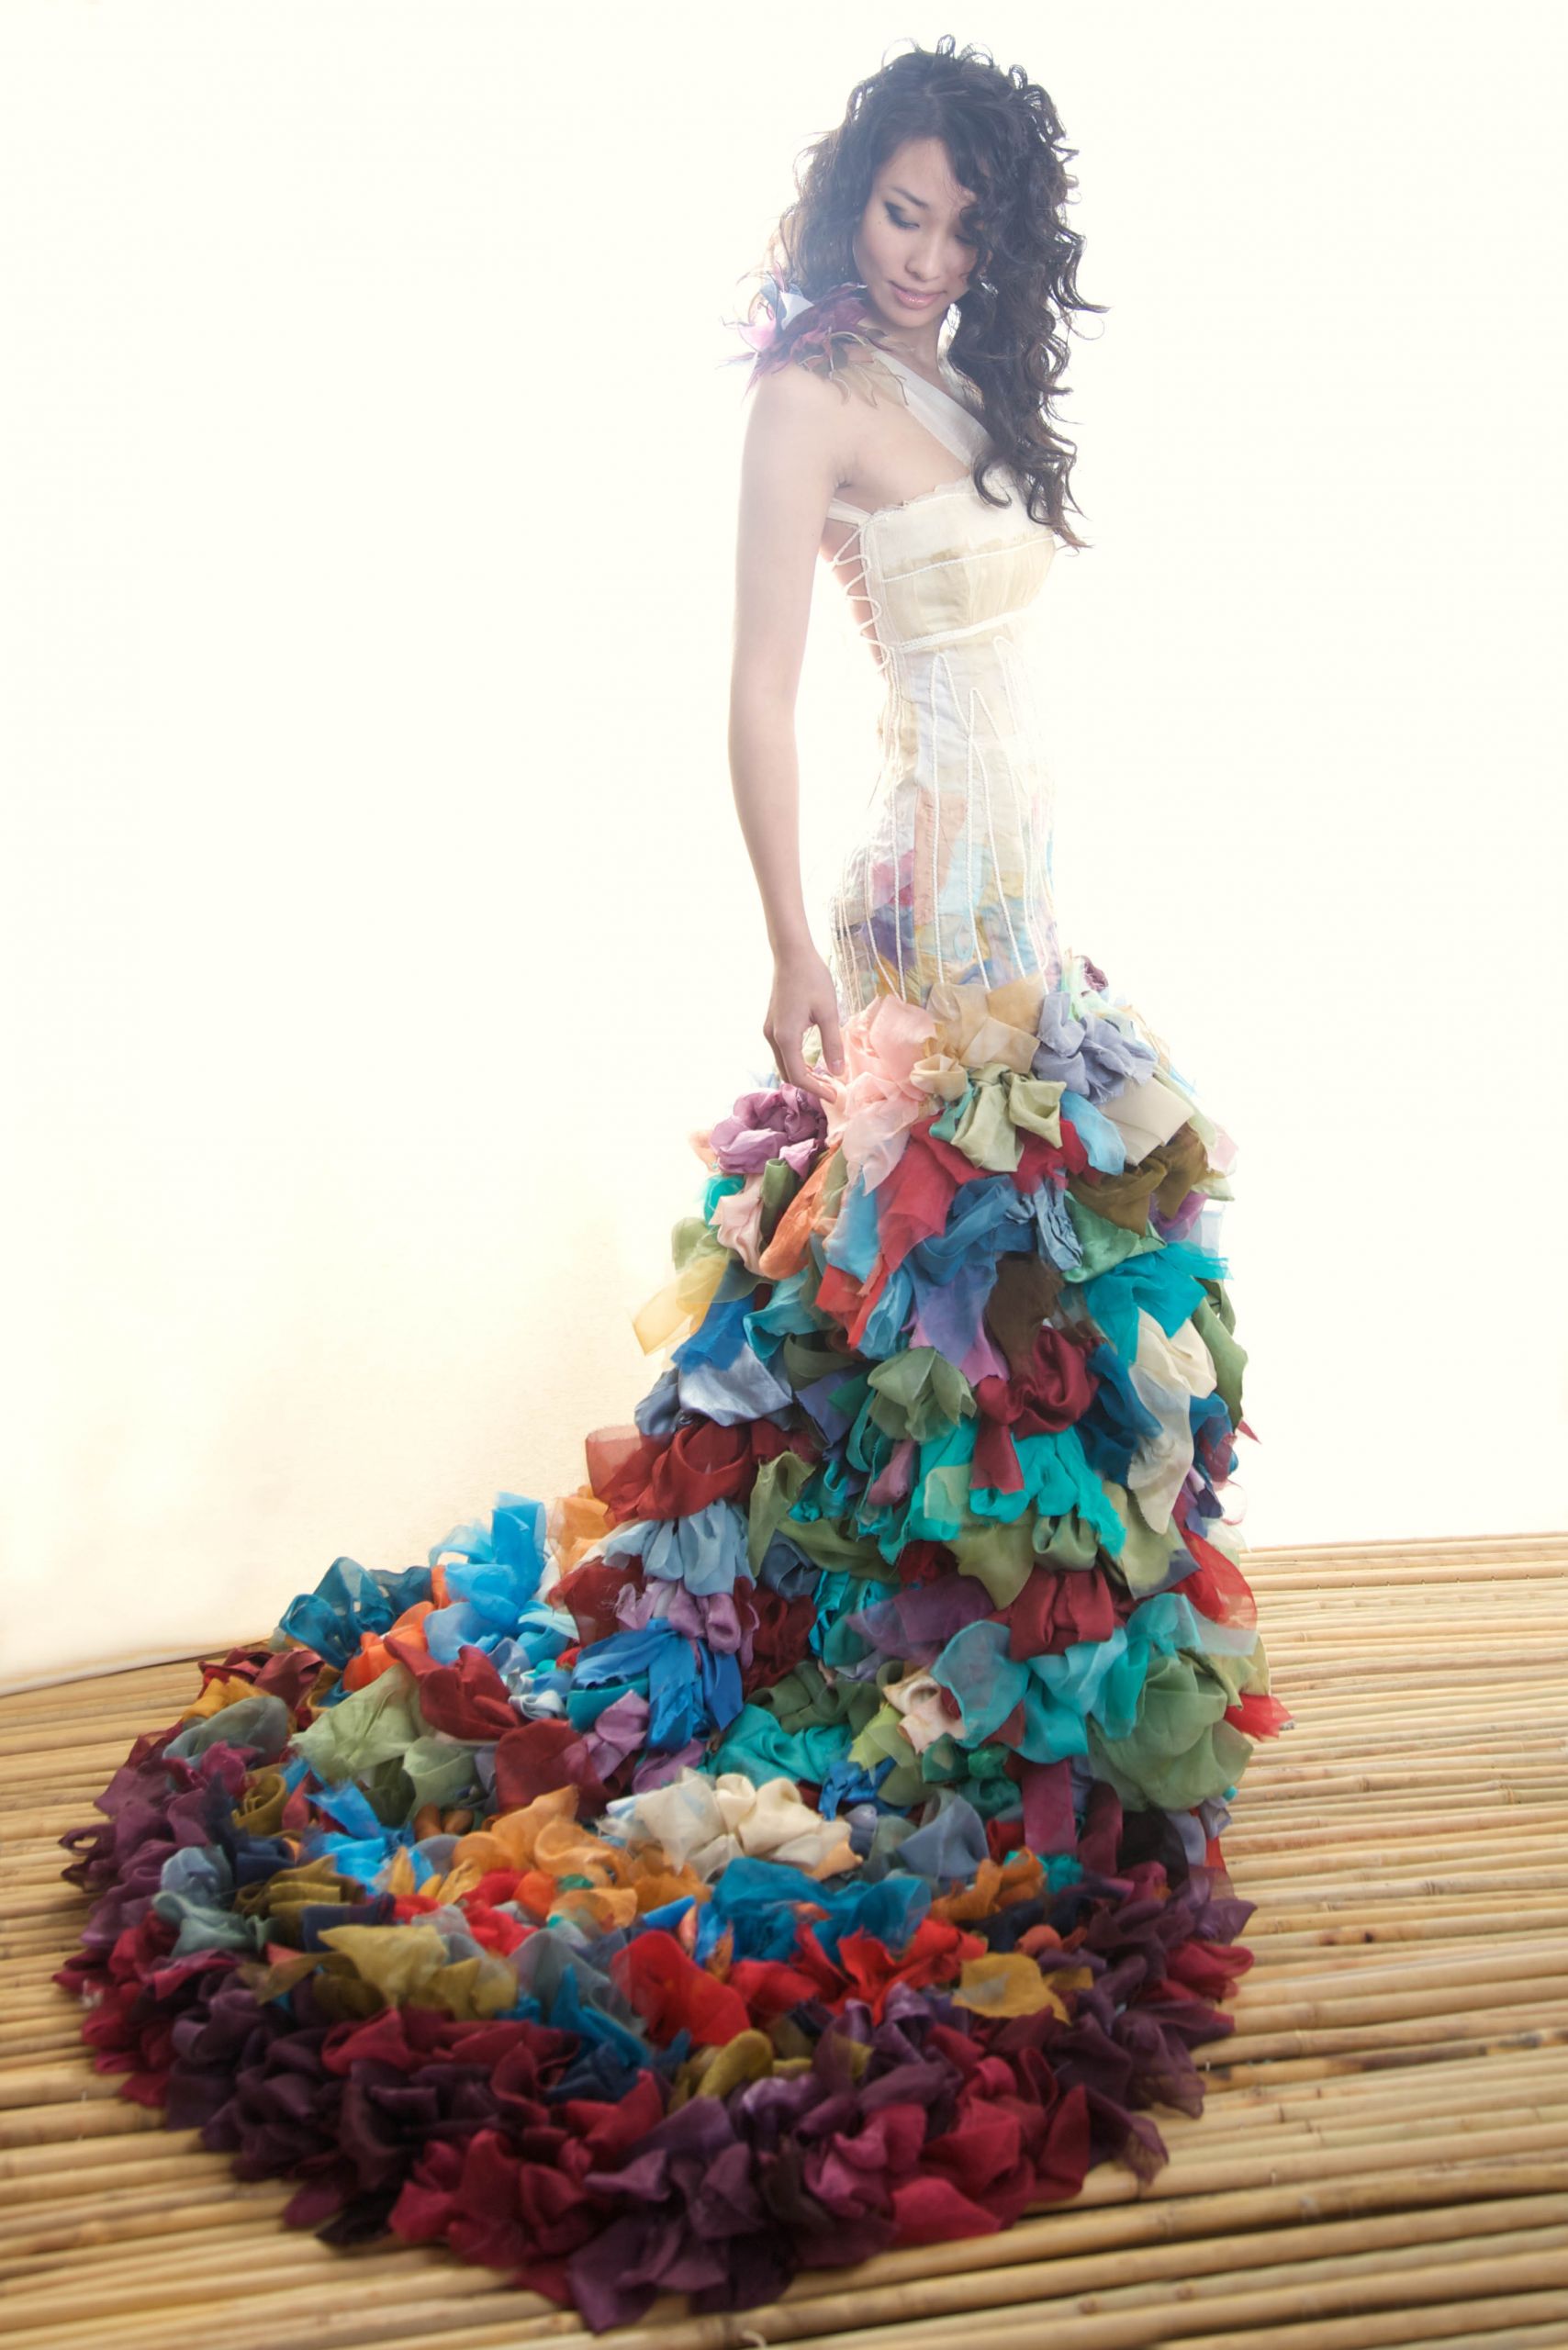 Colors Not To Wear To A Wedding
 Alternative & Colourful Wedding Dresses from Chrissy Wai